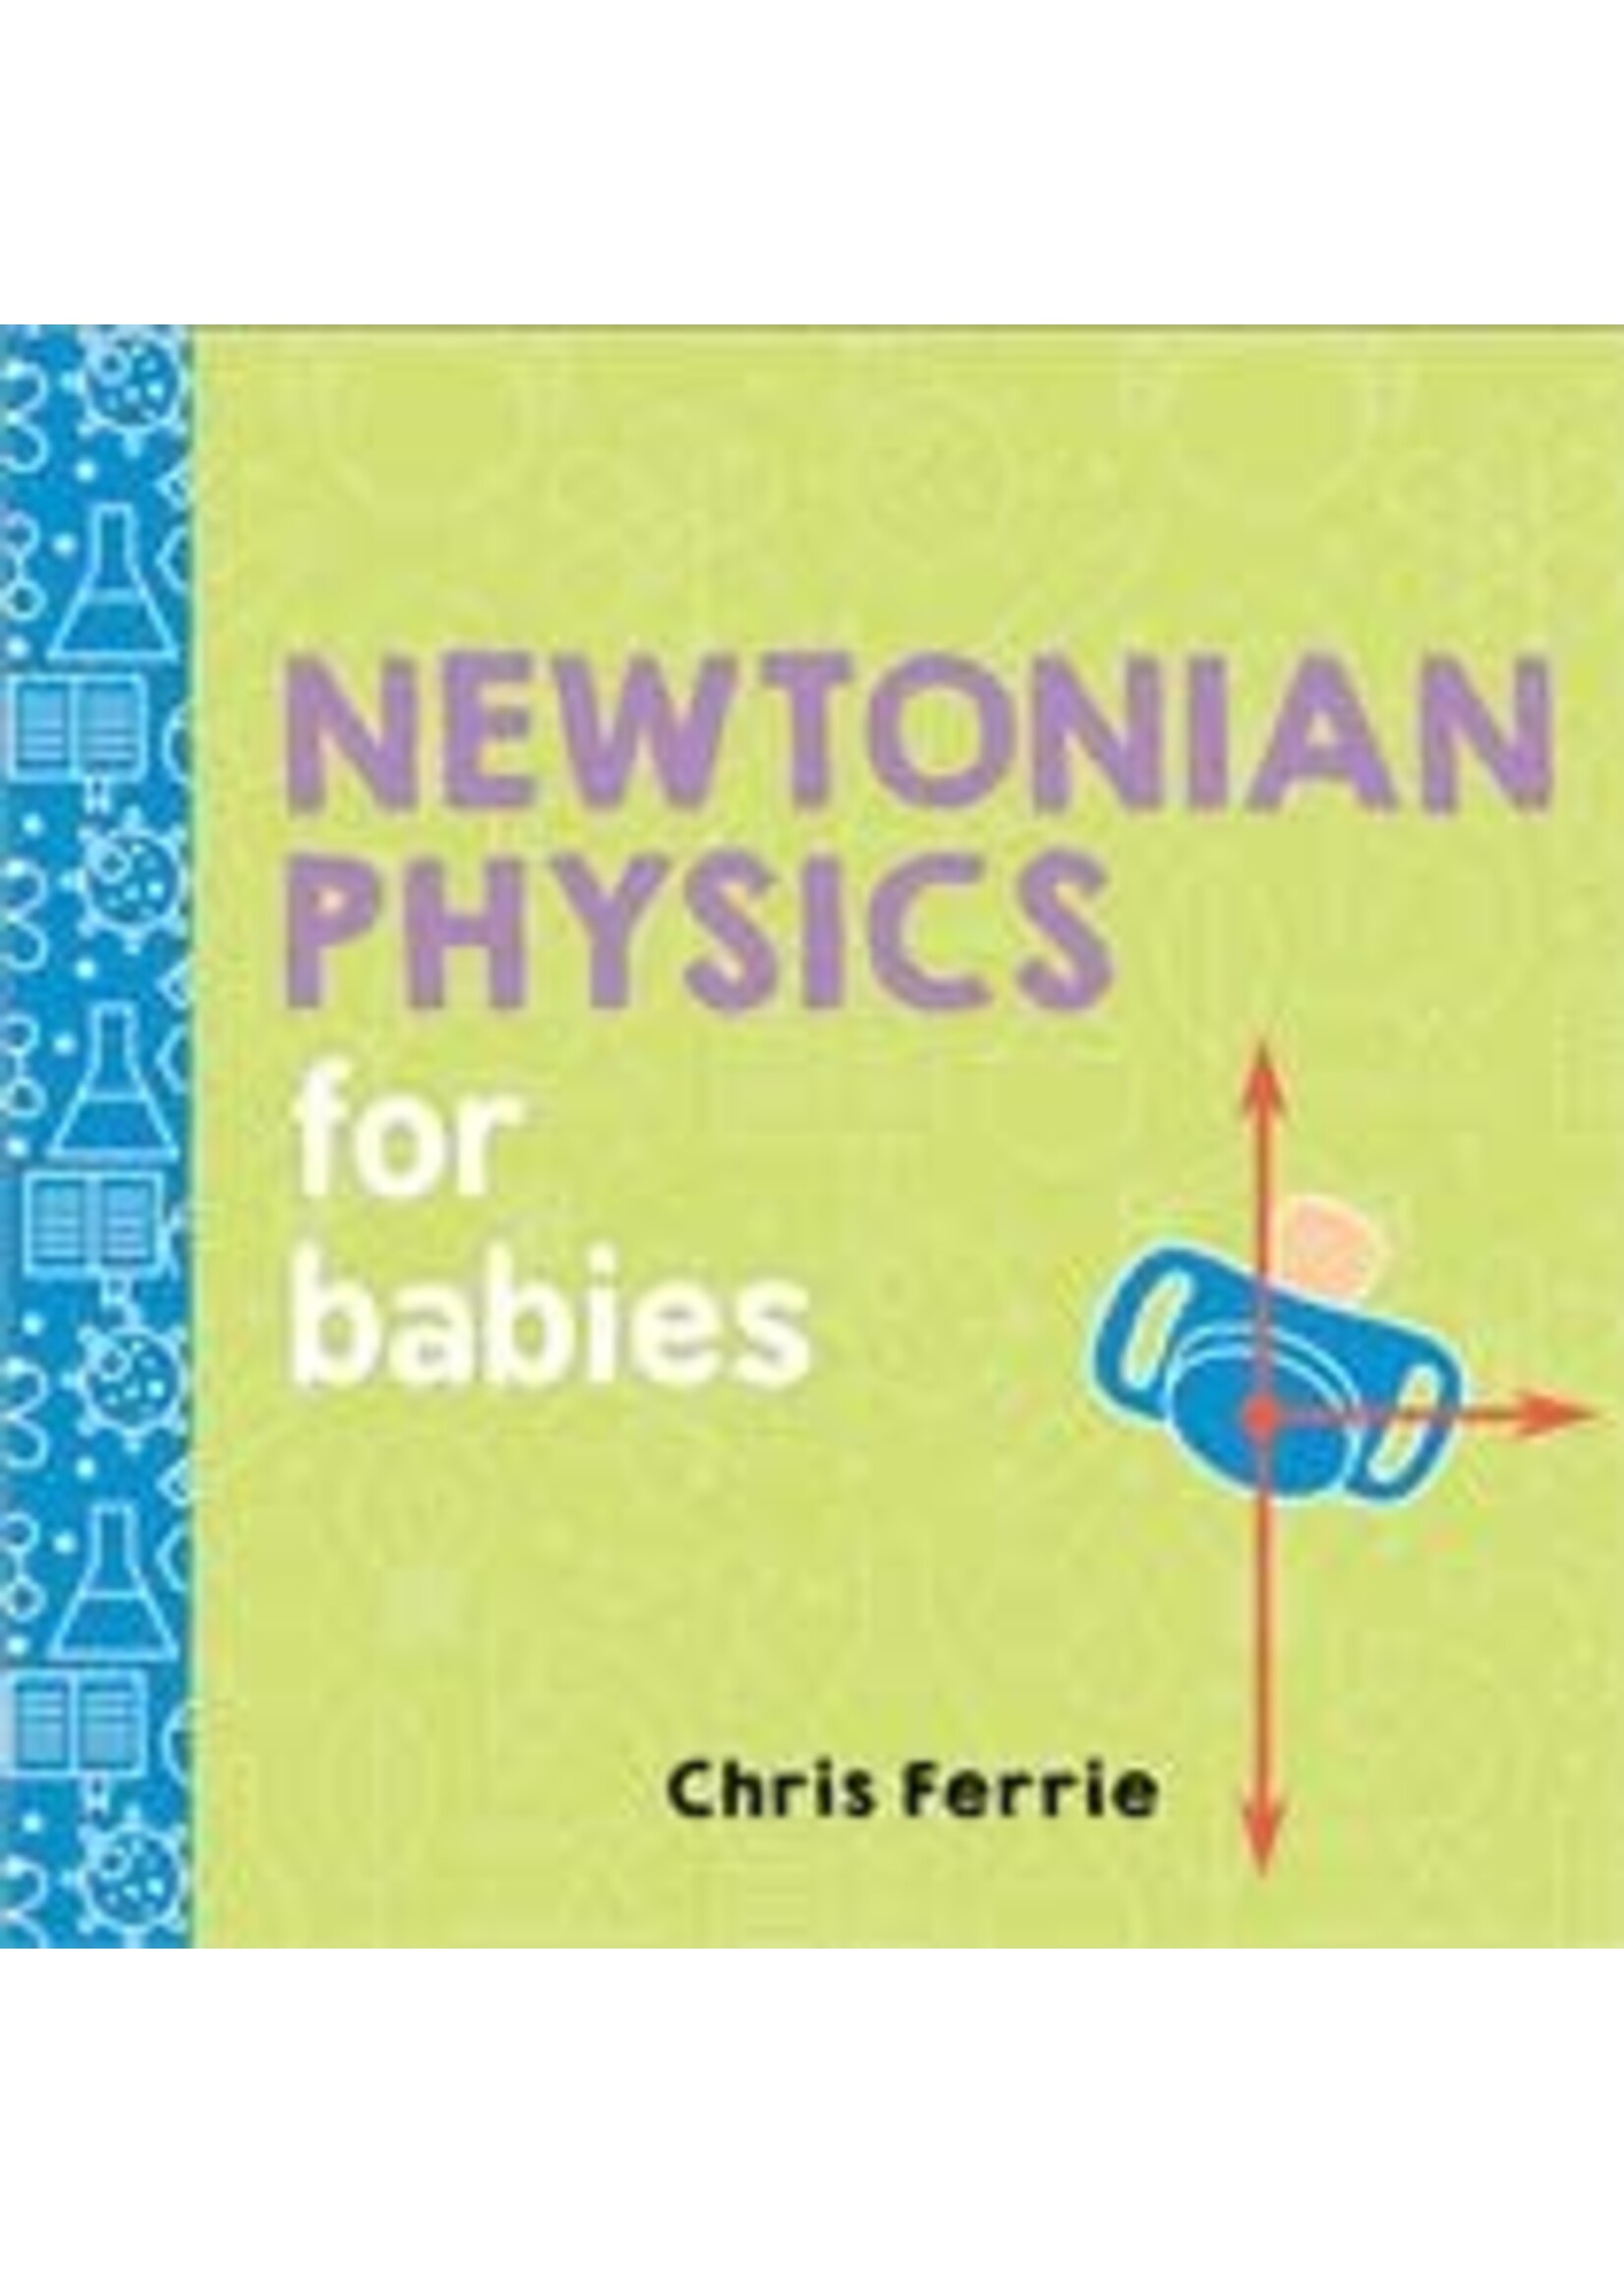 Newtonian Physics for Babies by Chris Ferrie